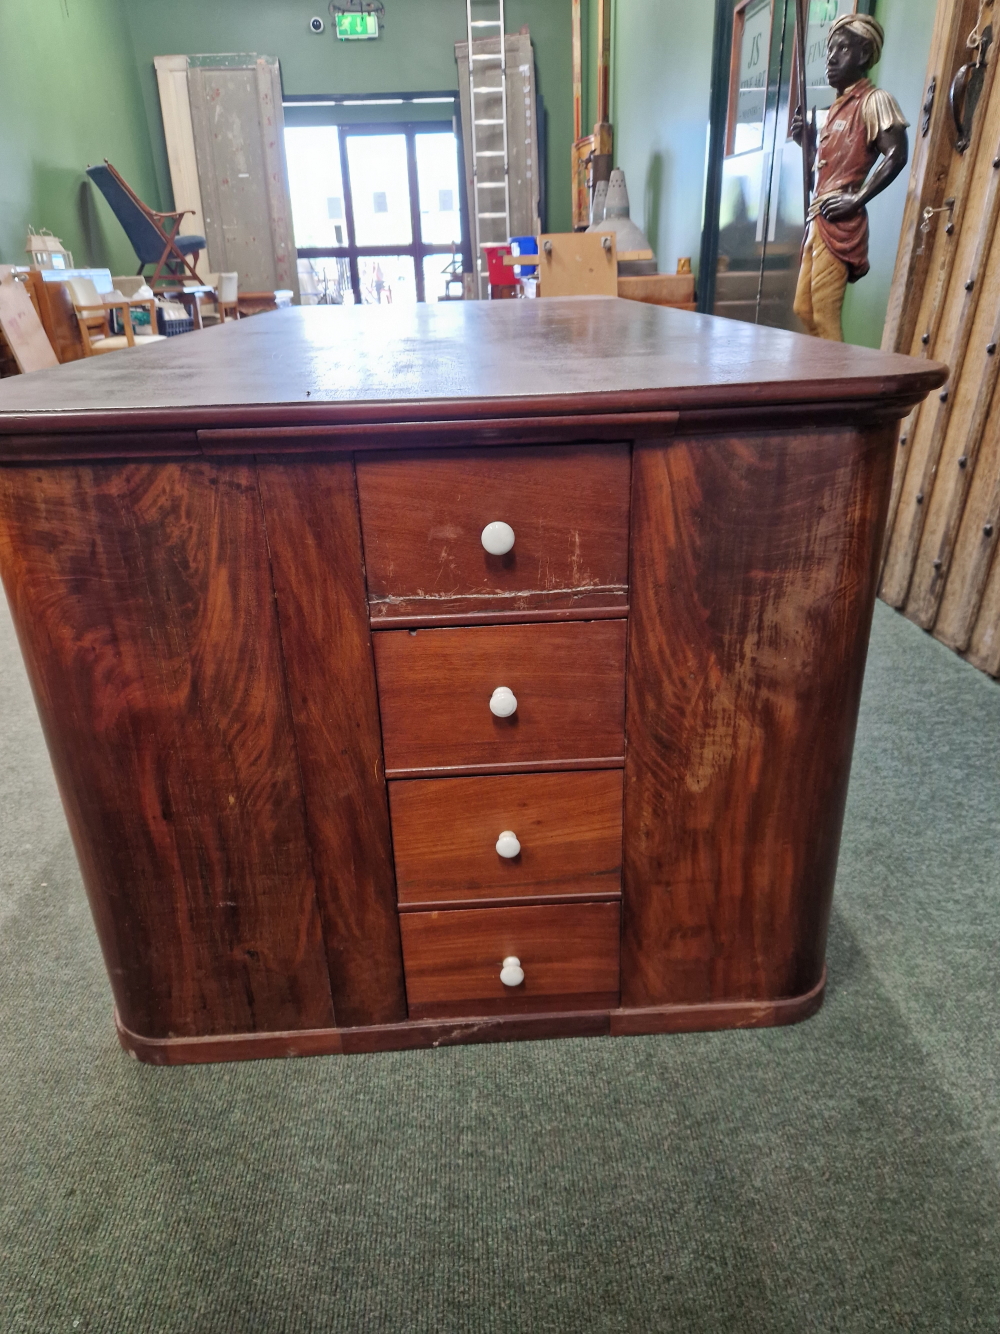 A MAHOGANY SHOP COUNTER FITTED WITH MULTIPLE DRAWERS AND CUPBOARDS EACH WITH WHITE CERAMIC KNOB - Image 4 of 23